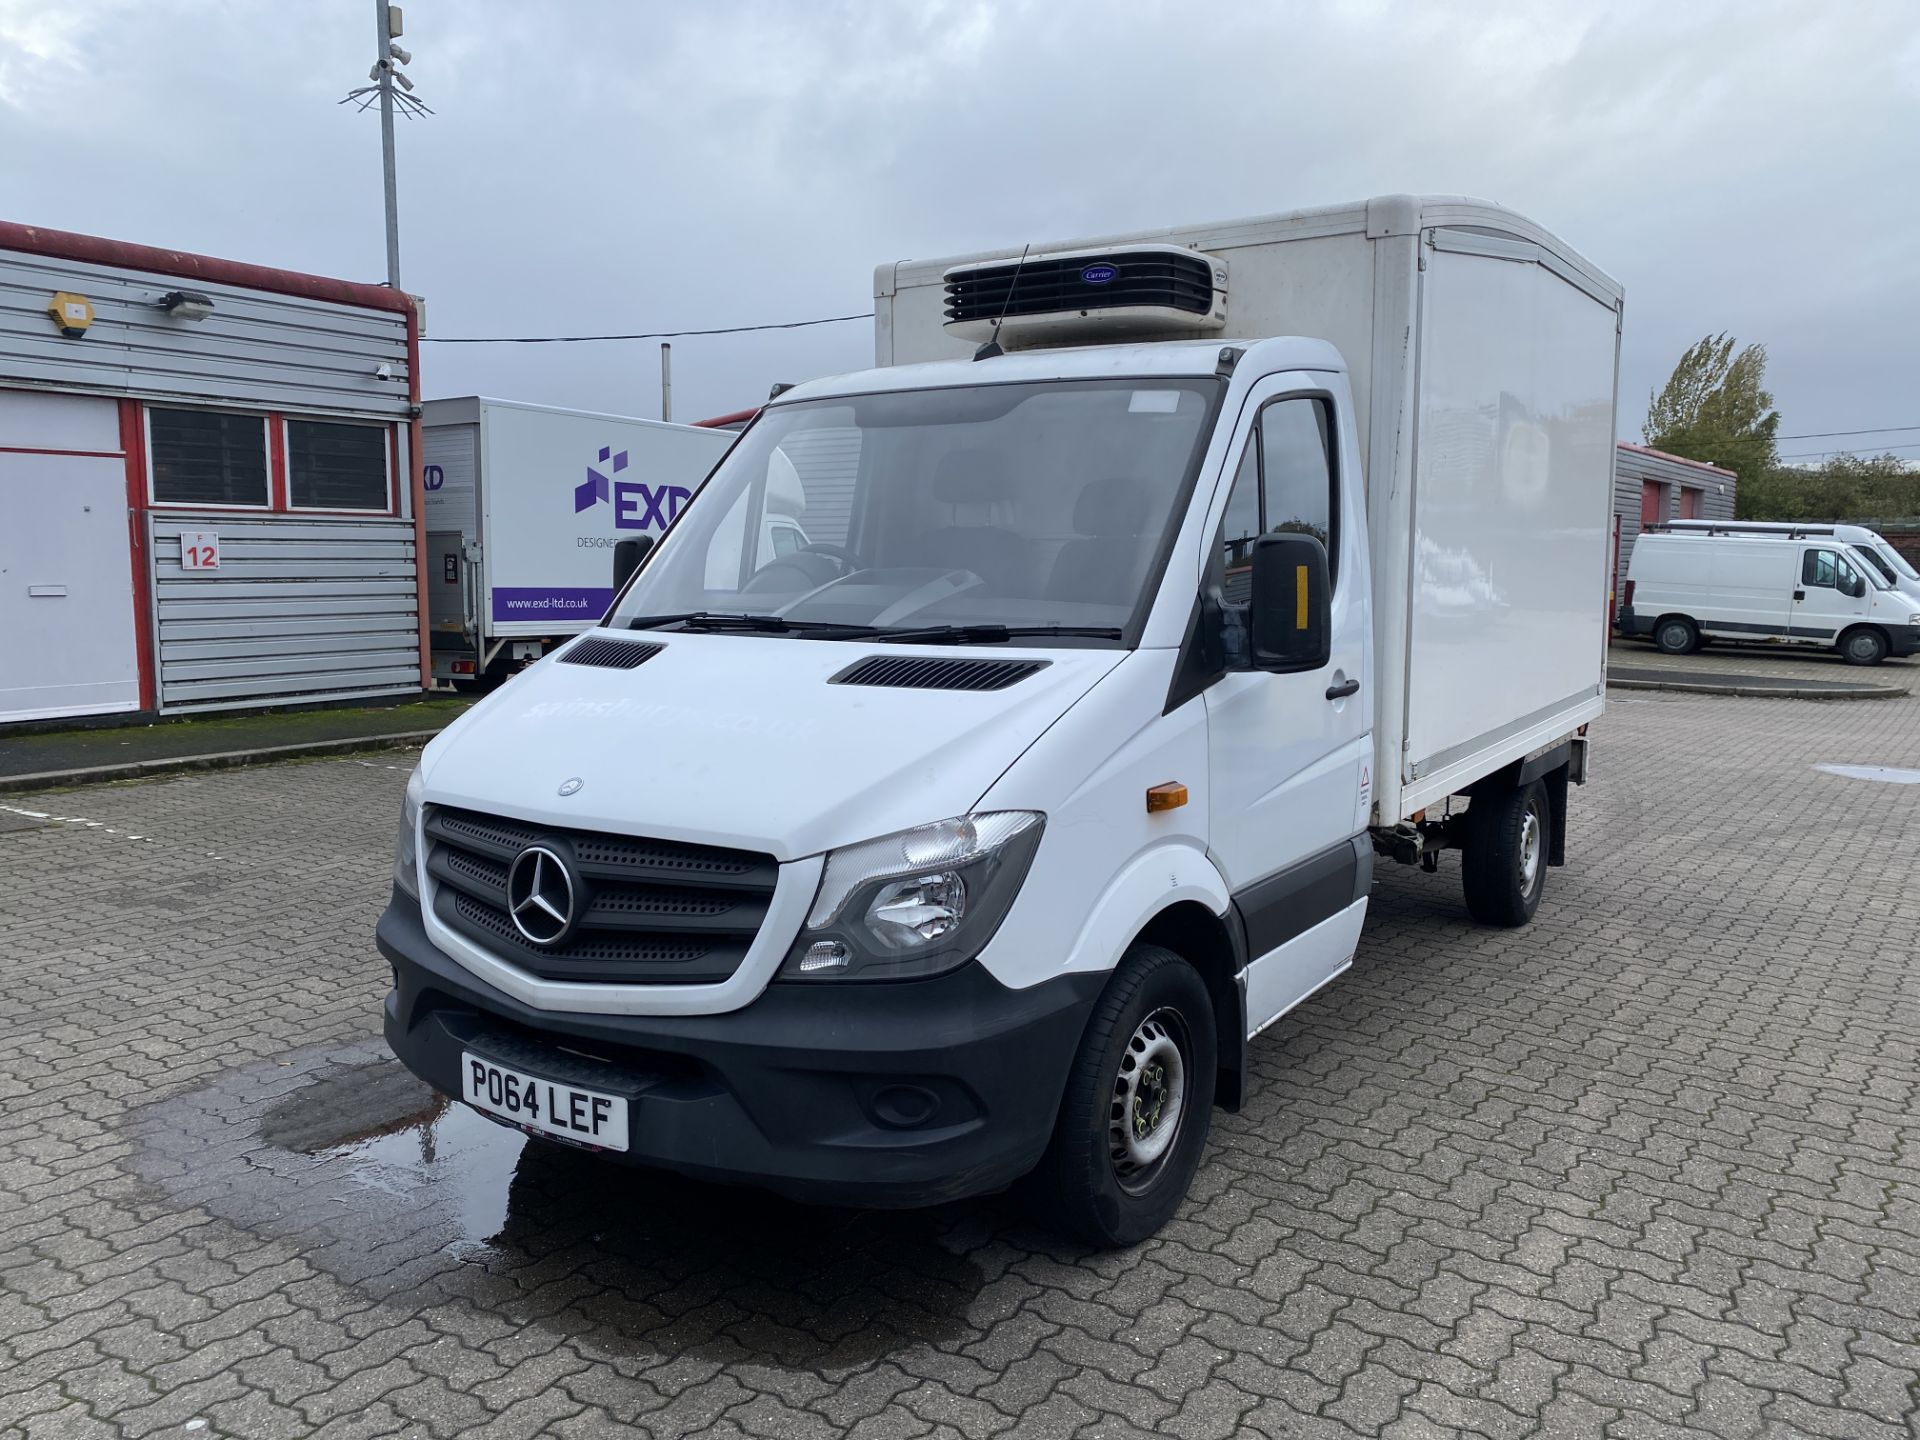 Mercedes Sprinter 313 CDI Insulated Refrigerated Box Van - Image 4 of 77